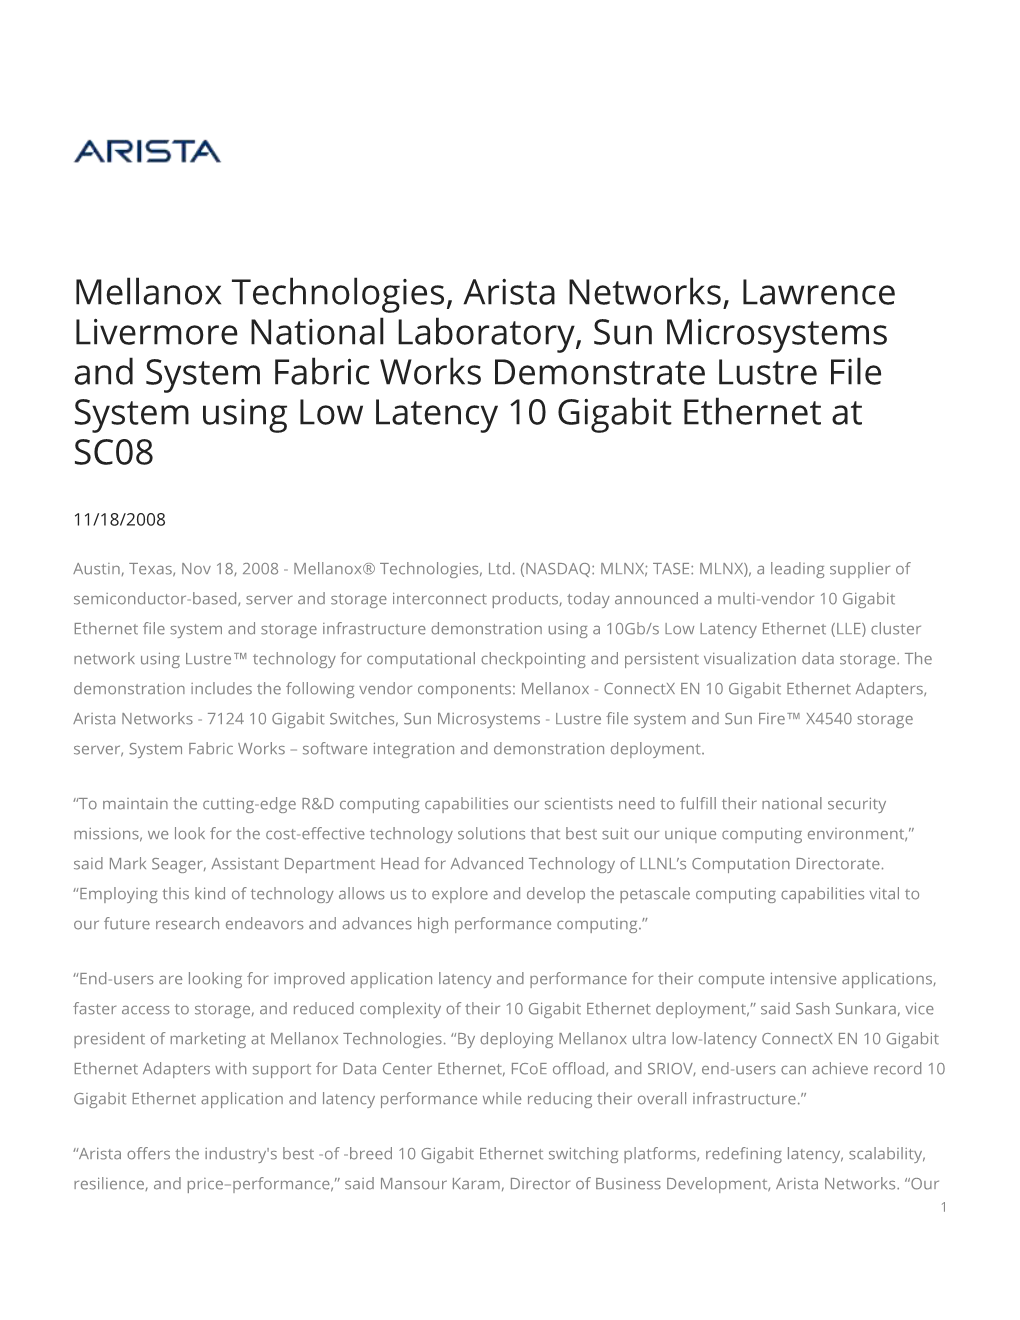 Mellanox Technologies, Arista Networks, Lawrence Livermore National Laboratory, Sun Microsystems and System Fabric Works Demonst